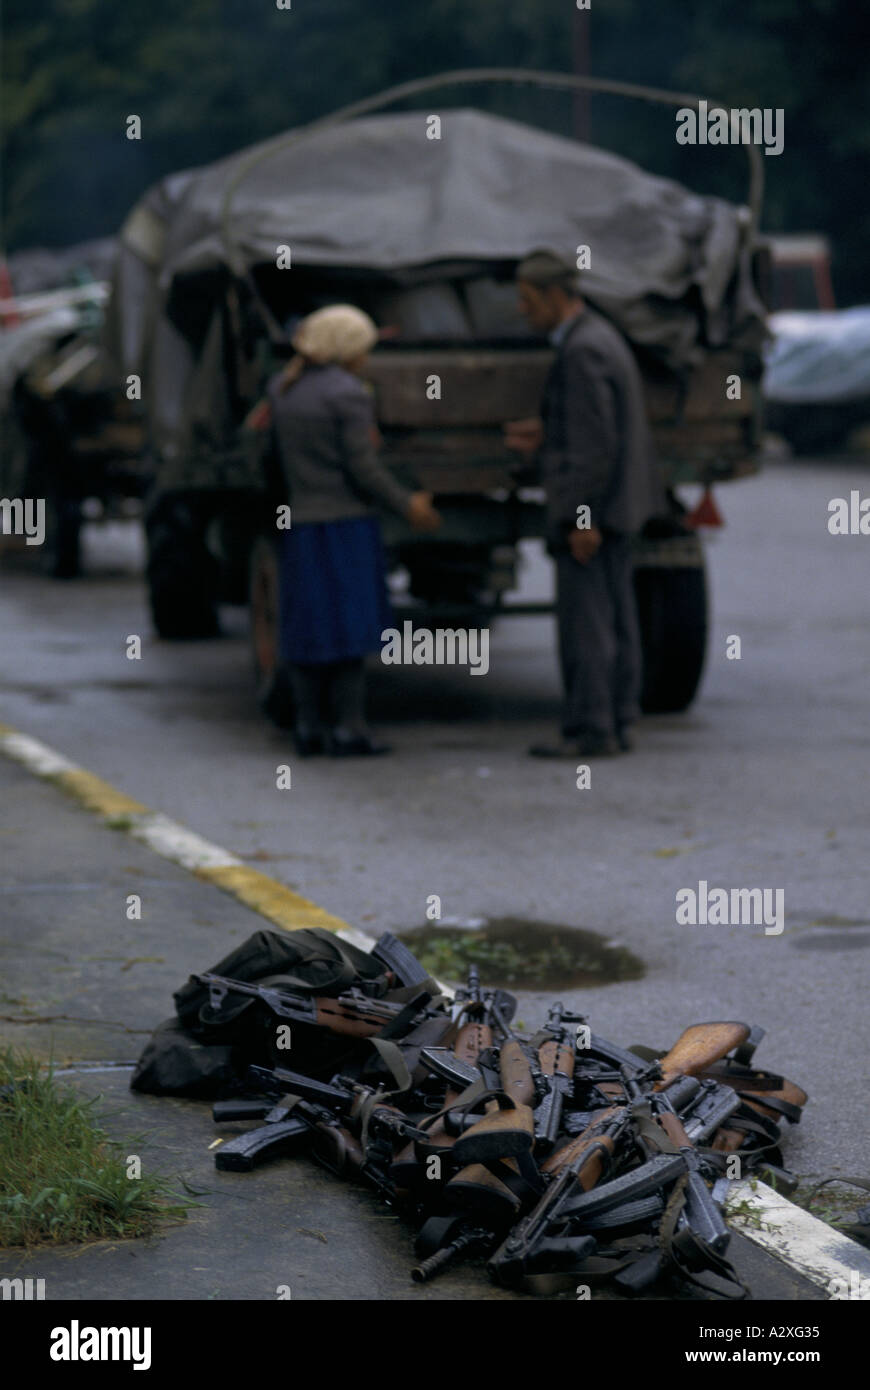 Croatian re-capture of Krajina, Aug 95: AK-47 rifles lie in a pile at Topusko as retreating Serb soldiers have surrendered them. Stock Photo